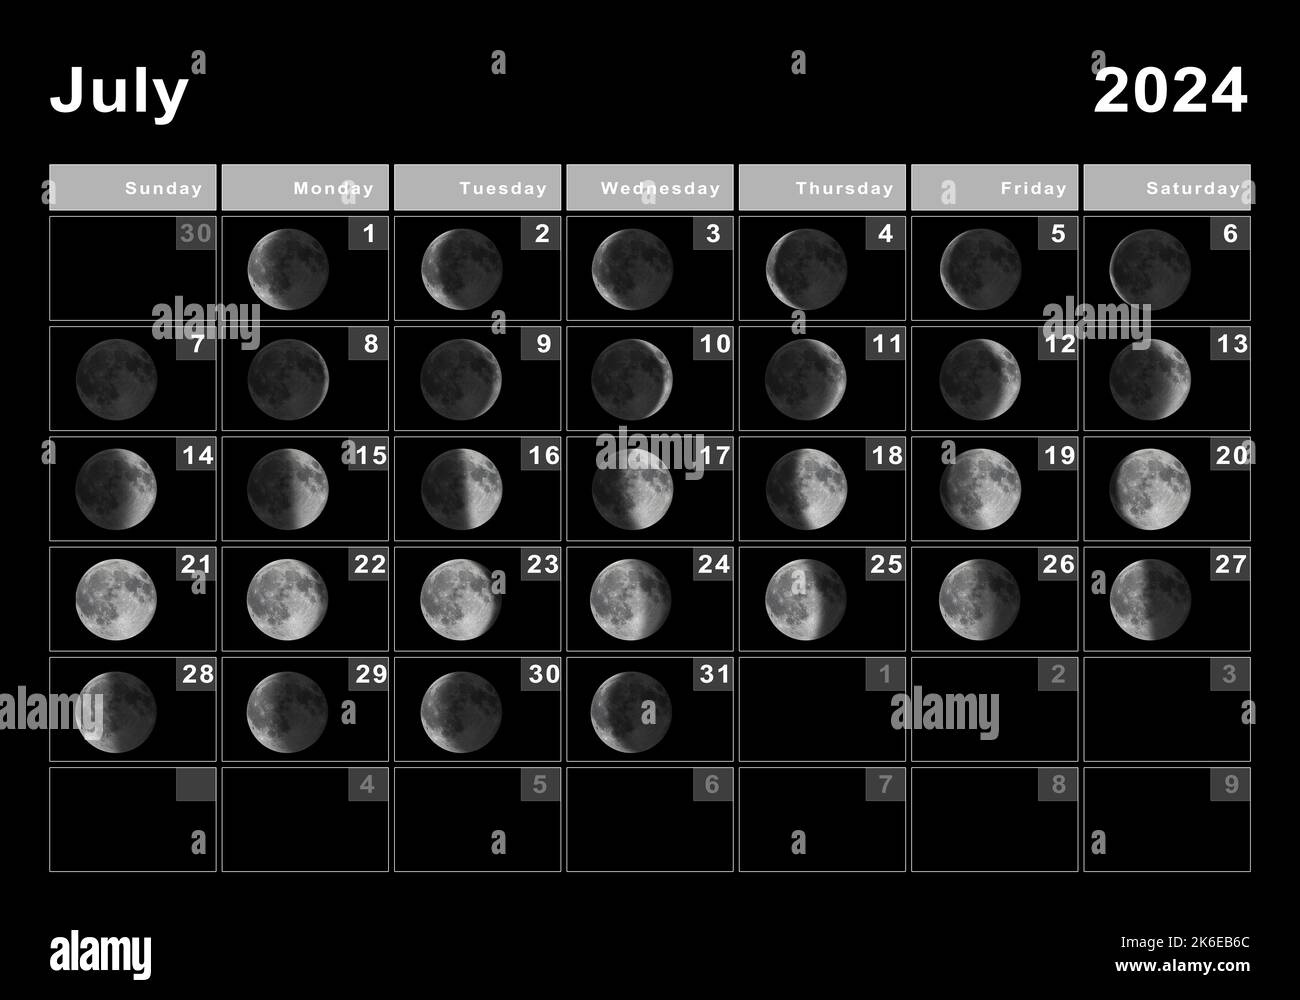 July 2024 Lunar Calendar, Moon Cycles, Moon Phases Stock Photo - Alamy intended for July 11Th Lunar Calendar 2024